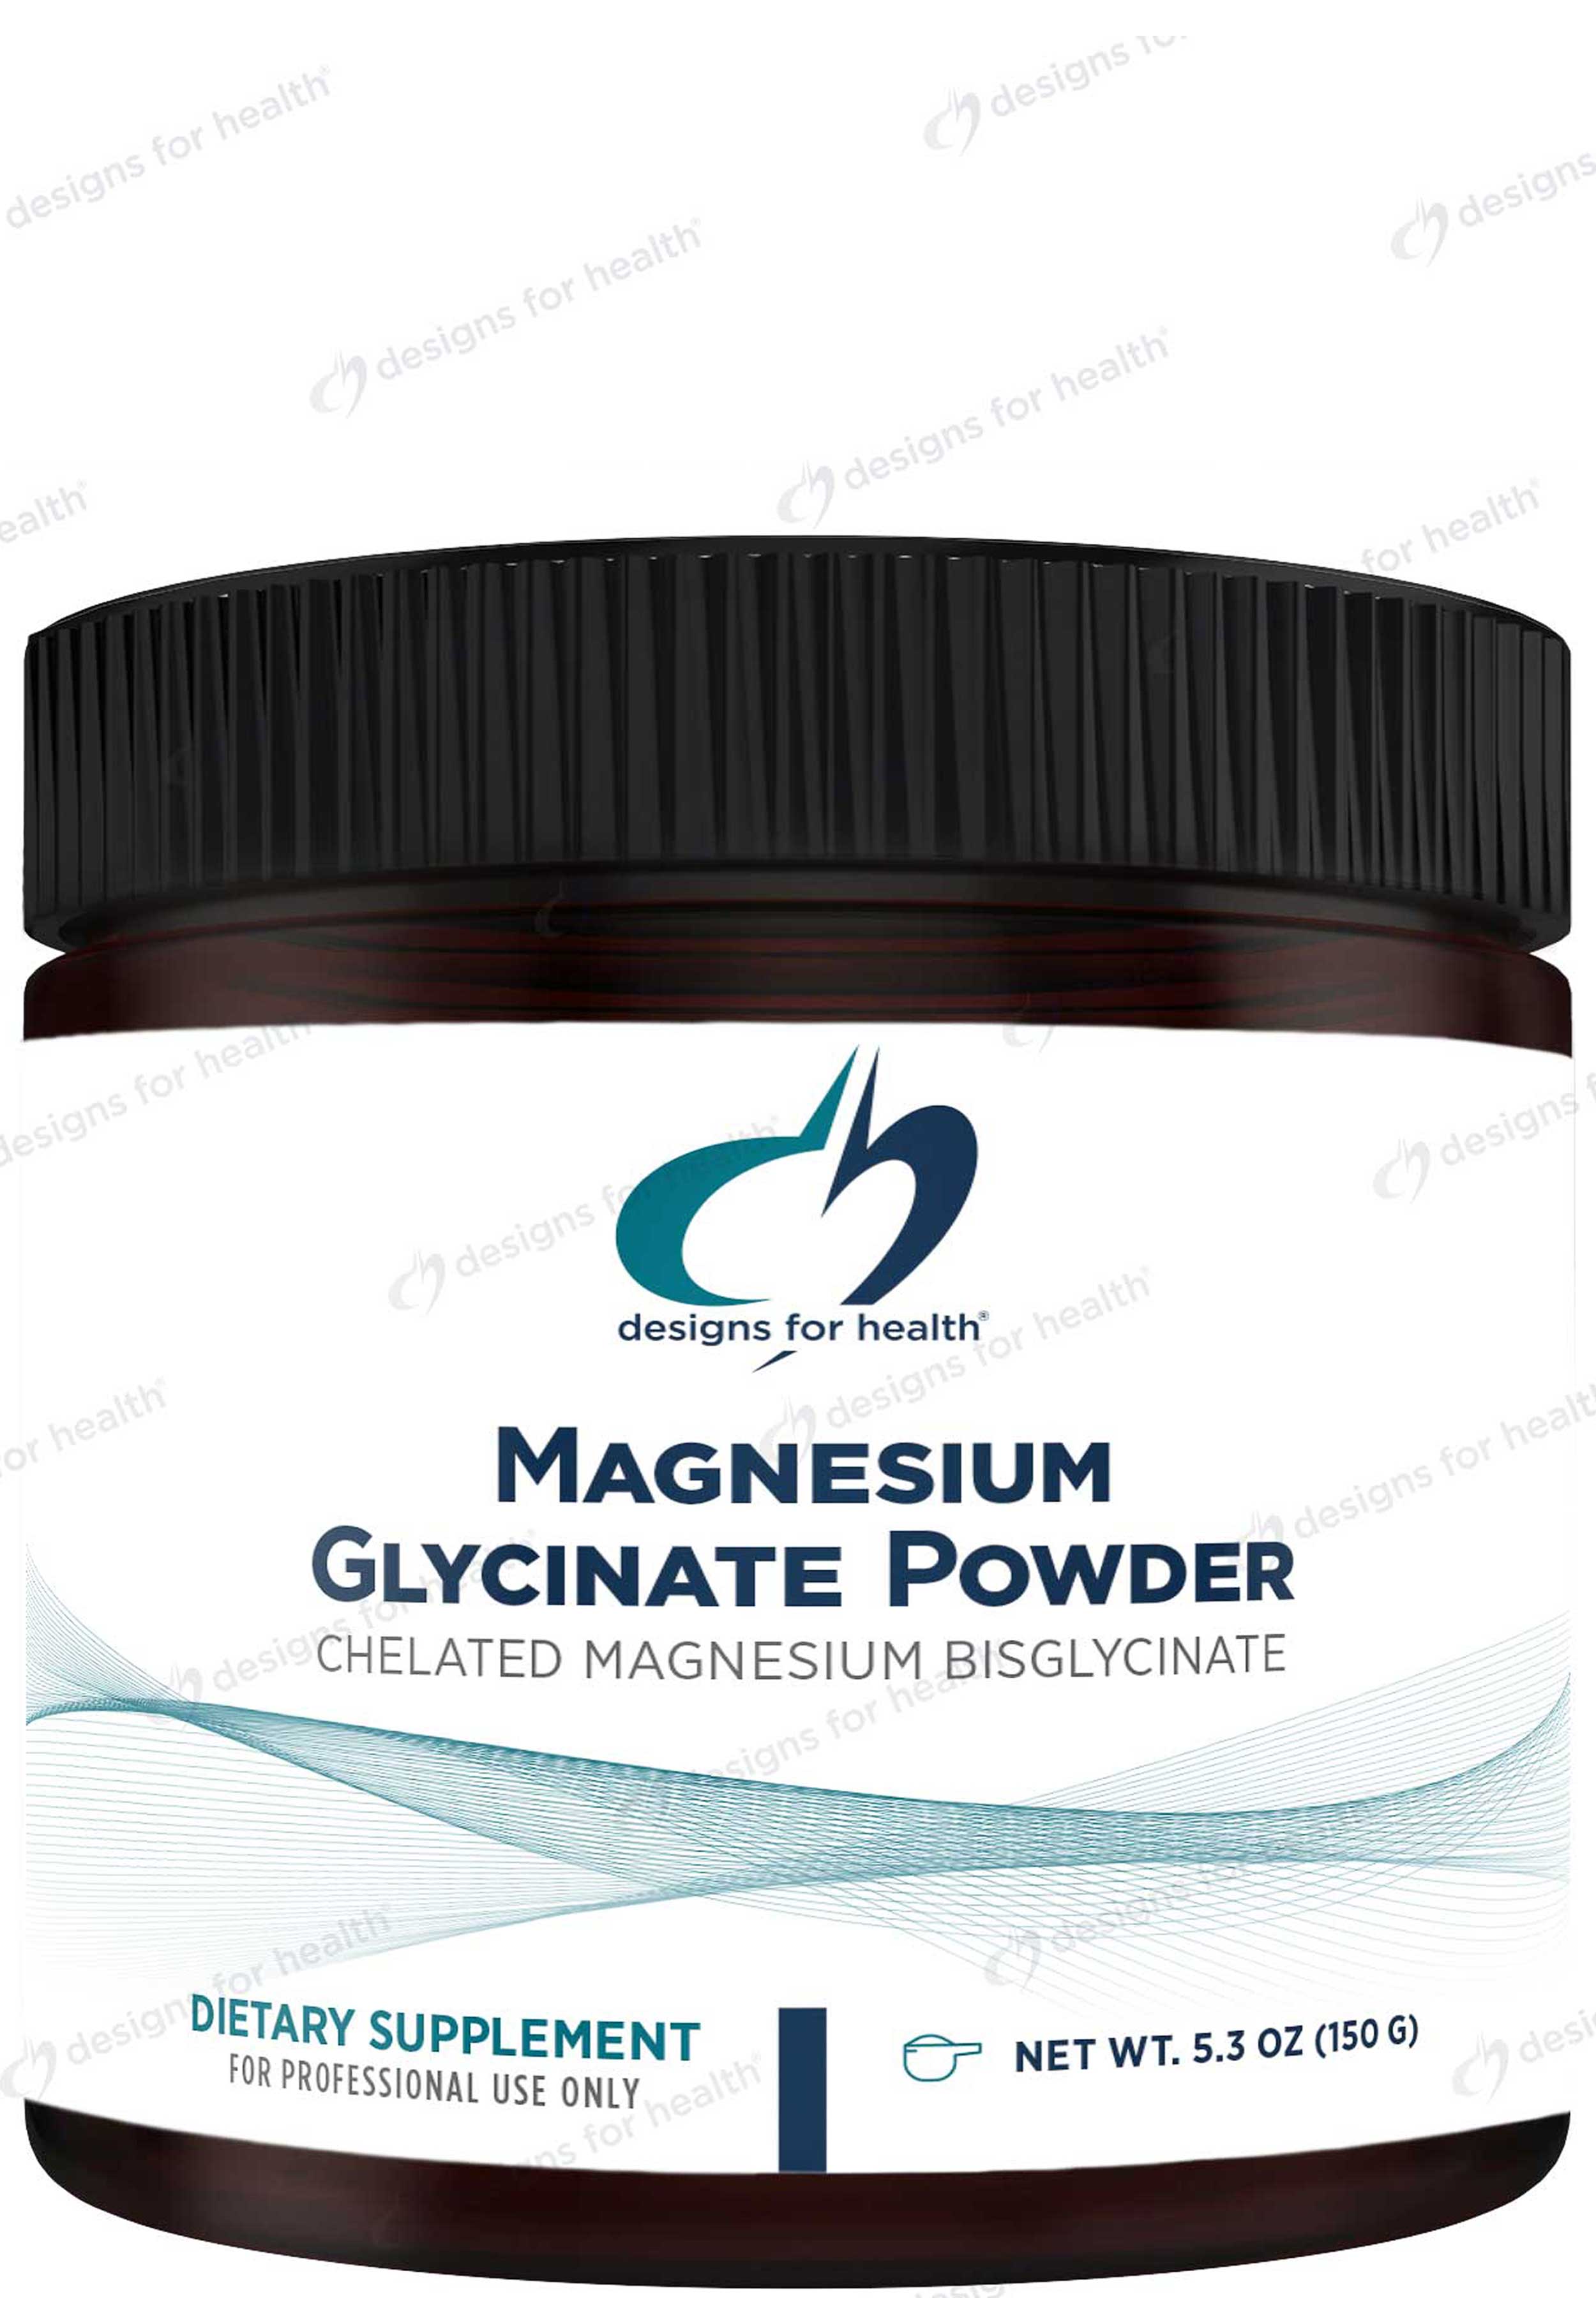 Designs for Health Magnesium Glycinate Powder (Formerly Magnesium Chelate Powder)